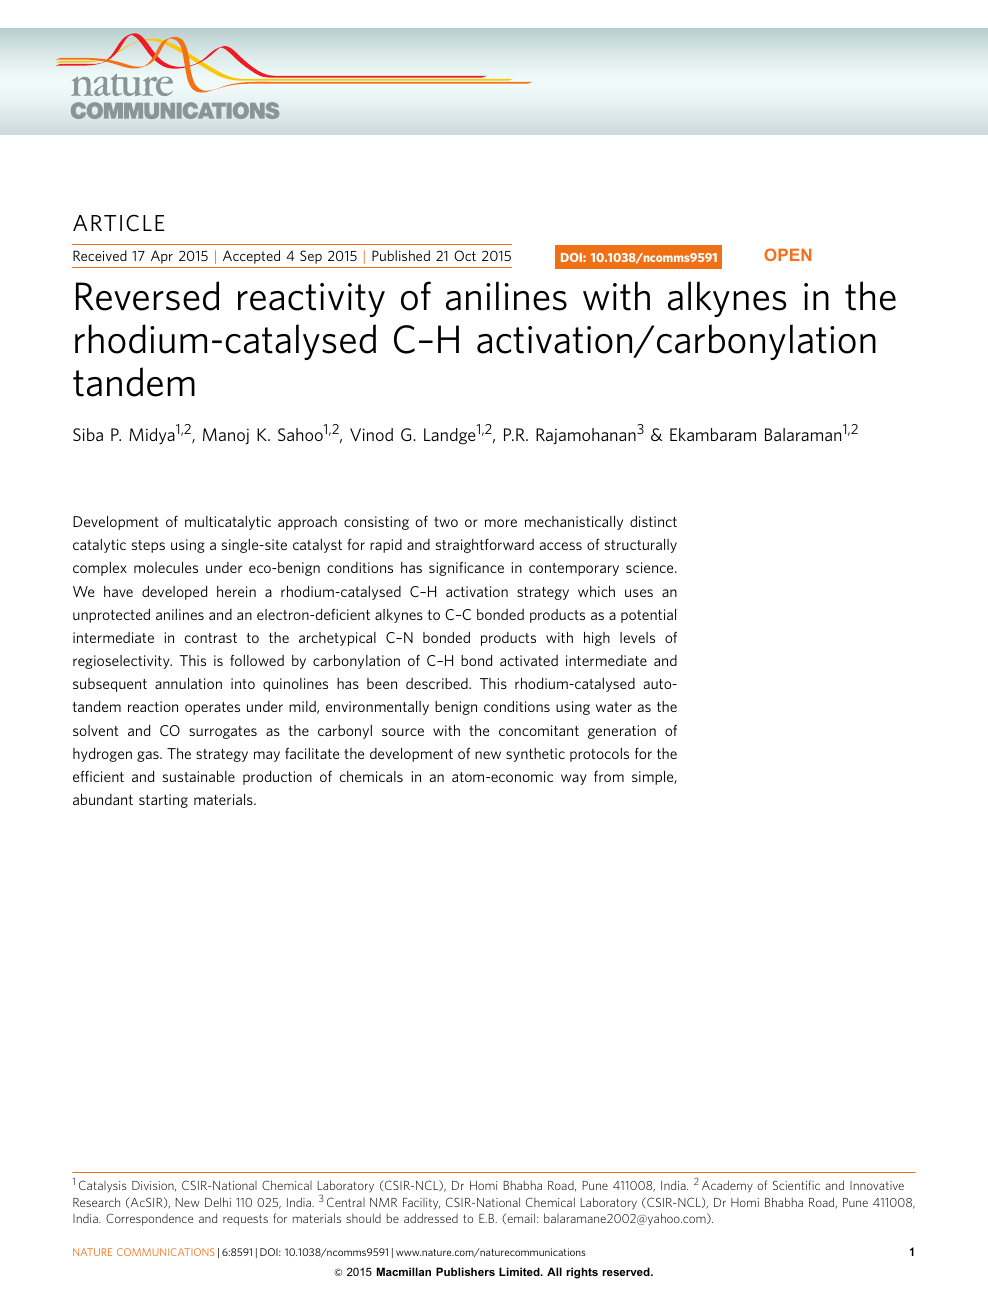 Reversed Reactivity Of Anilines With Alkynes In The Rhodium Catalysed C H Activation Carbonylation Tandem Topic Of Research Paper In Chemical Sciences Download Scholarly Article Pdf And Read For Free On Cyberleninka Open Science